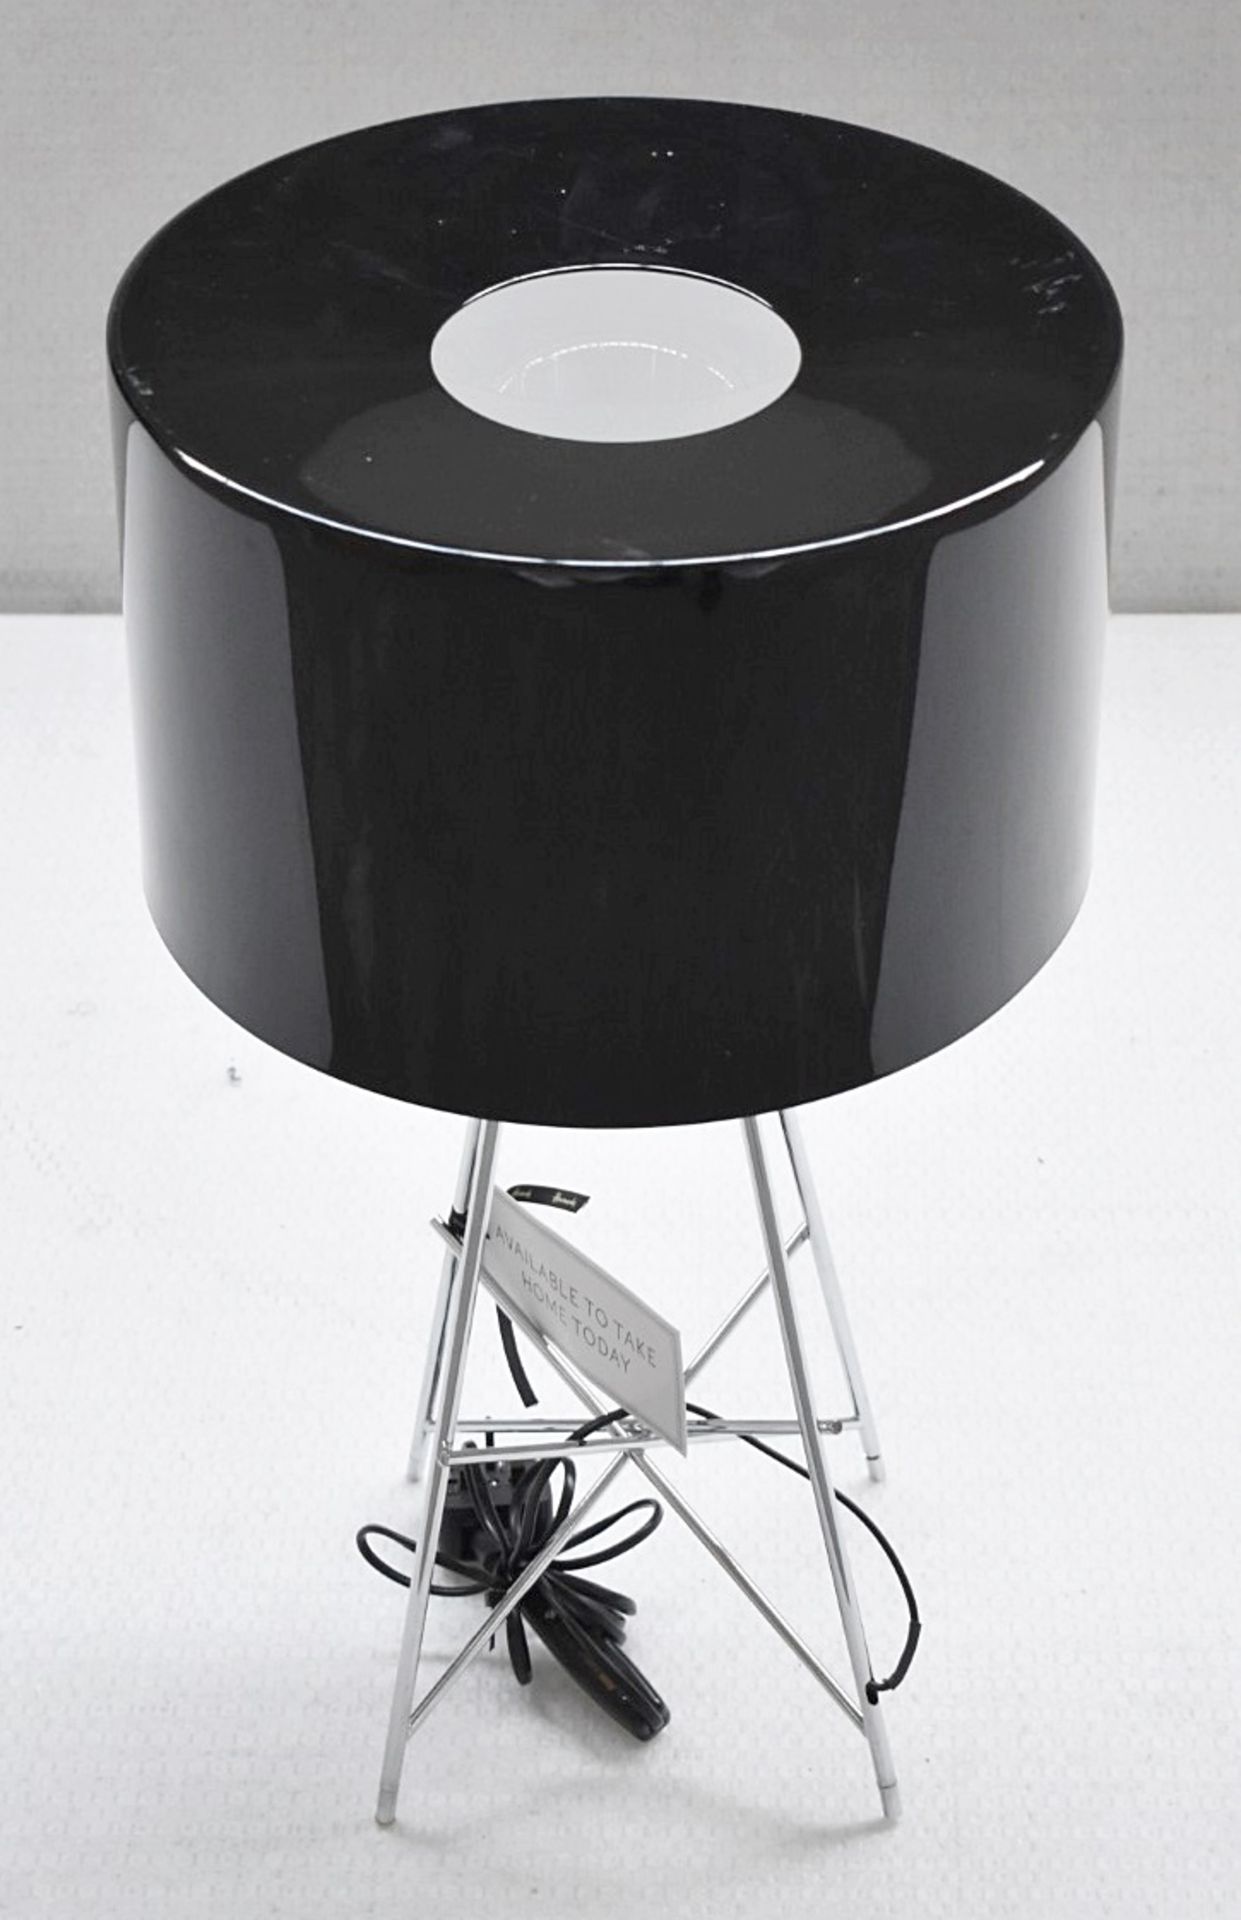 1 x FLOS 'Ray' Designer Table Lamp With Black Shade And Chrome Plated Steel Base - RRP £695.00 - Image 3 of 4